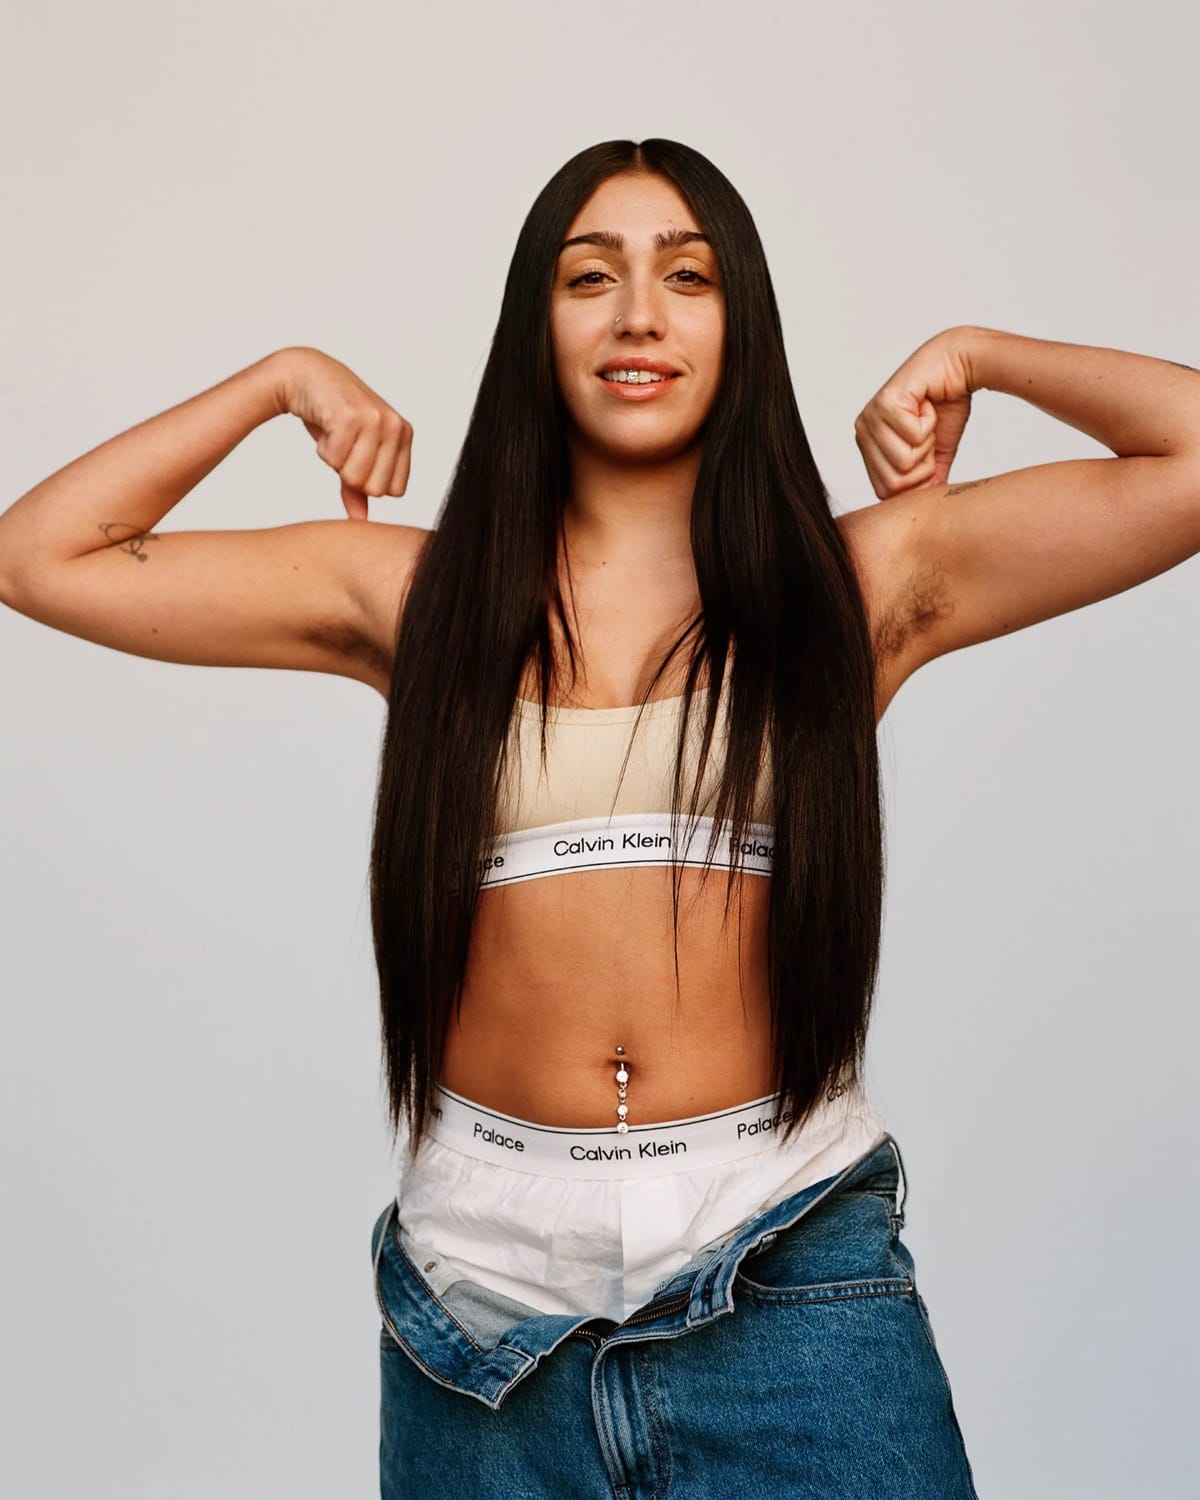 Lourdes Leon tries to normalize visible body hair while flexing her muscles in jeans and Calvin Klein underwear